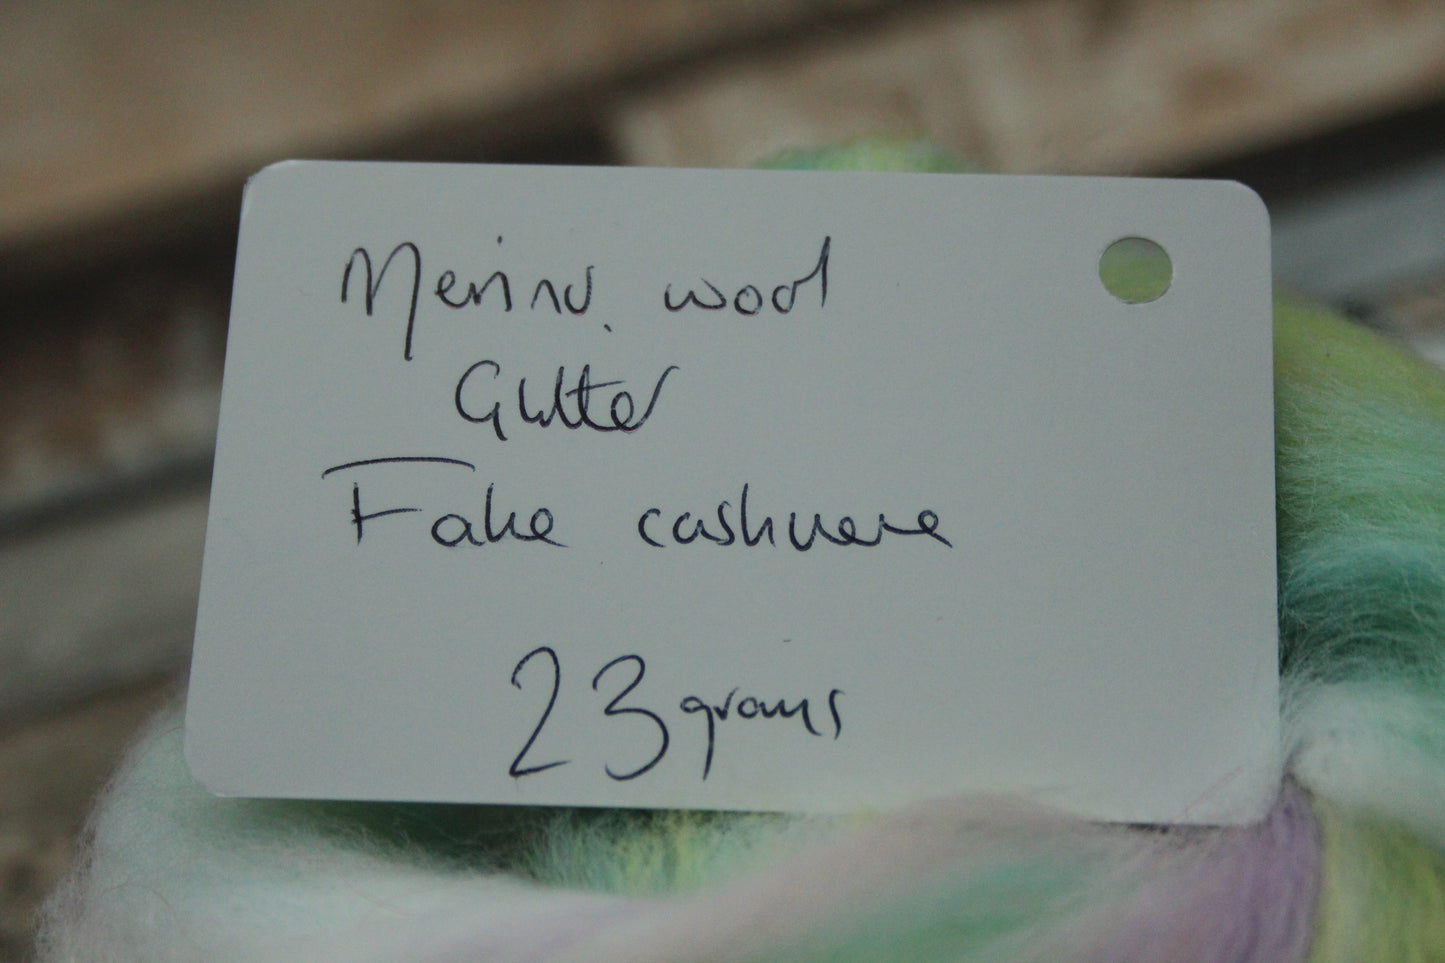 Wool Blend - Pink Turquoise Yellow Purple Green - 23 grams / 0.8 oz  - Fibre for felting, weaving or spinning